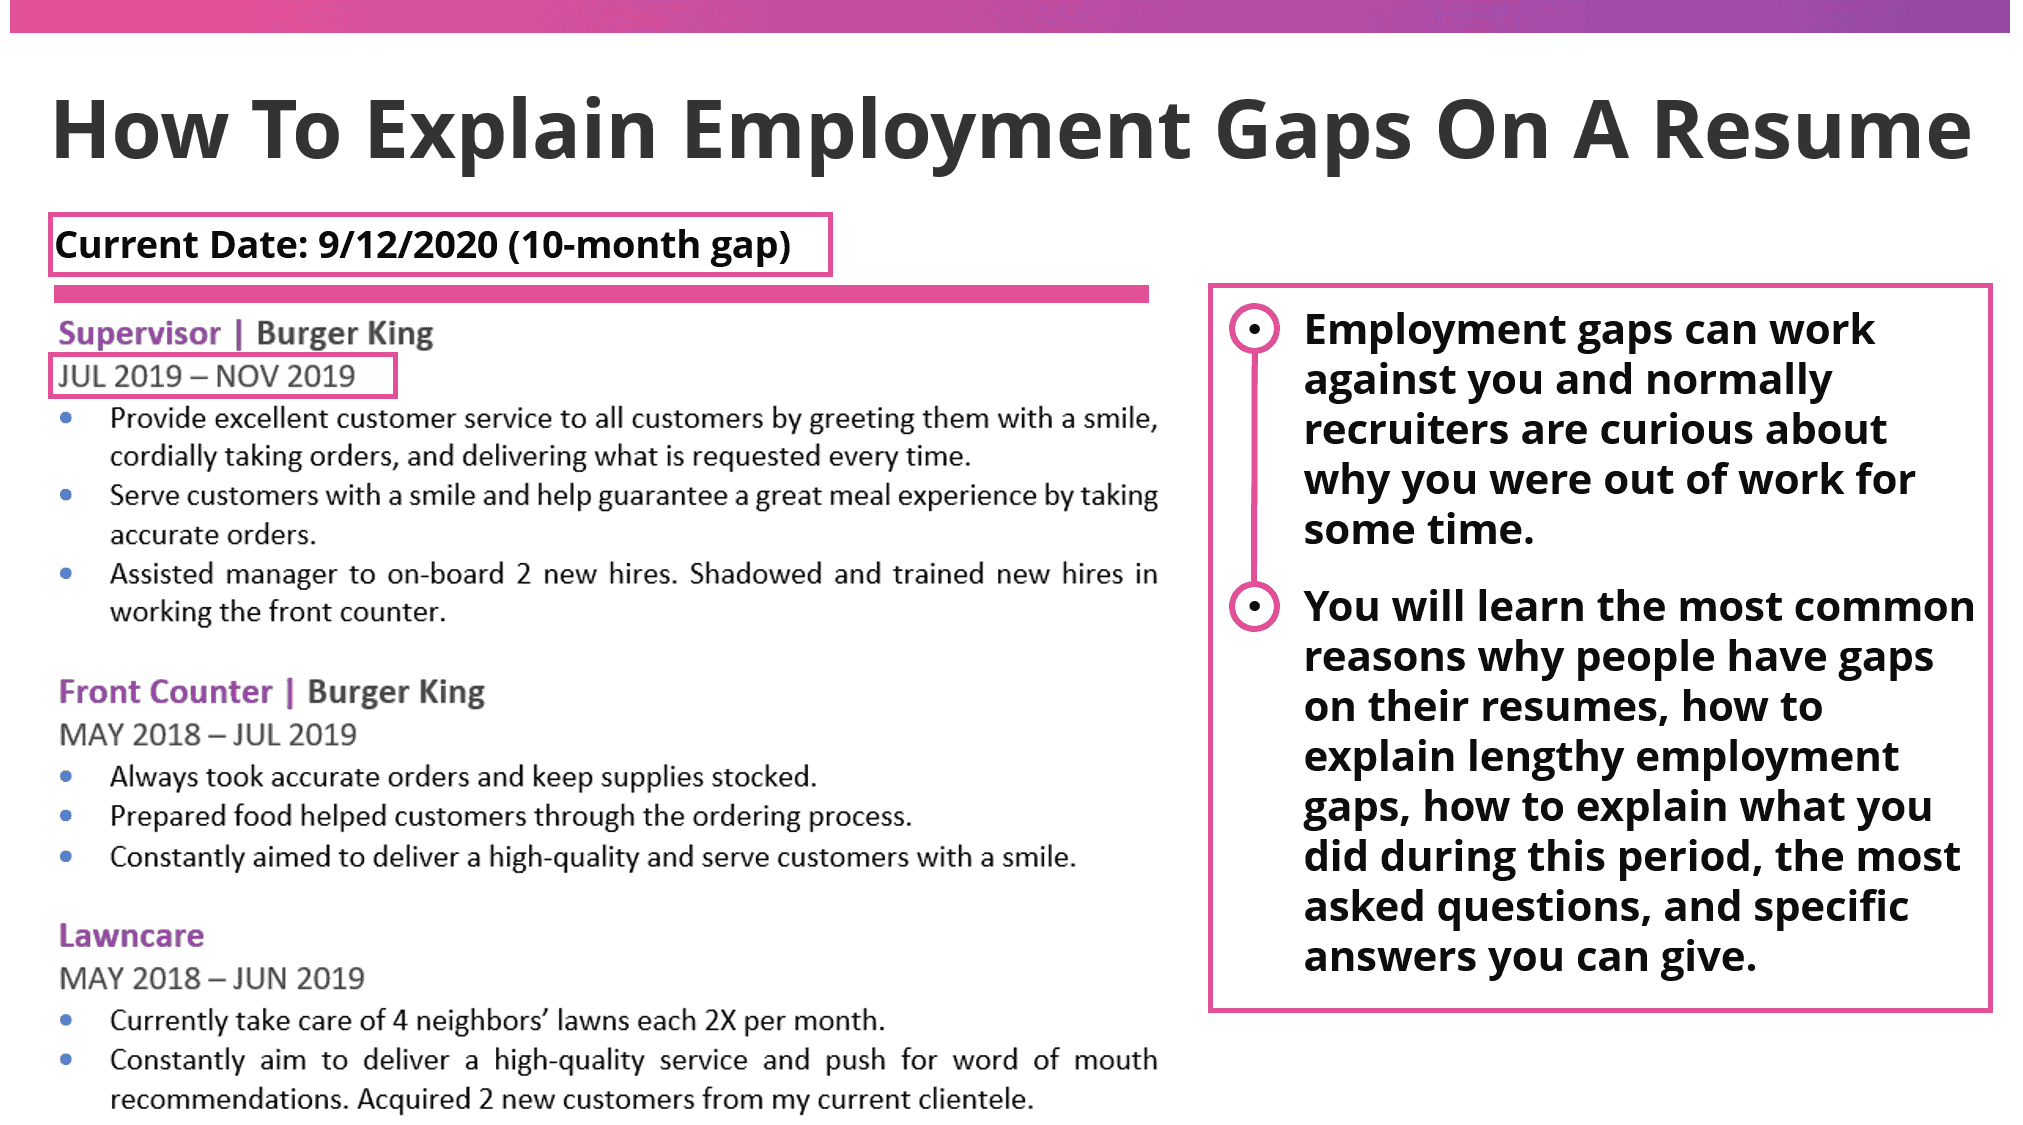 How To Explain Employment Gaps On A Resume: 10 Answers + Examples